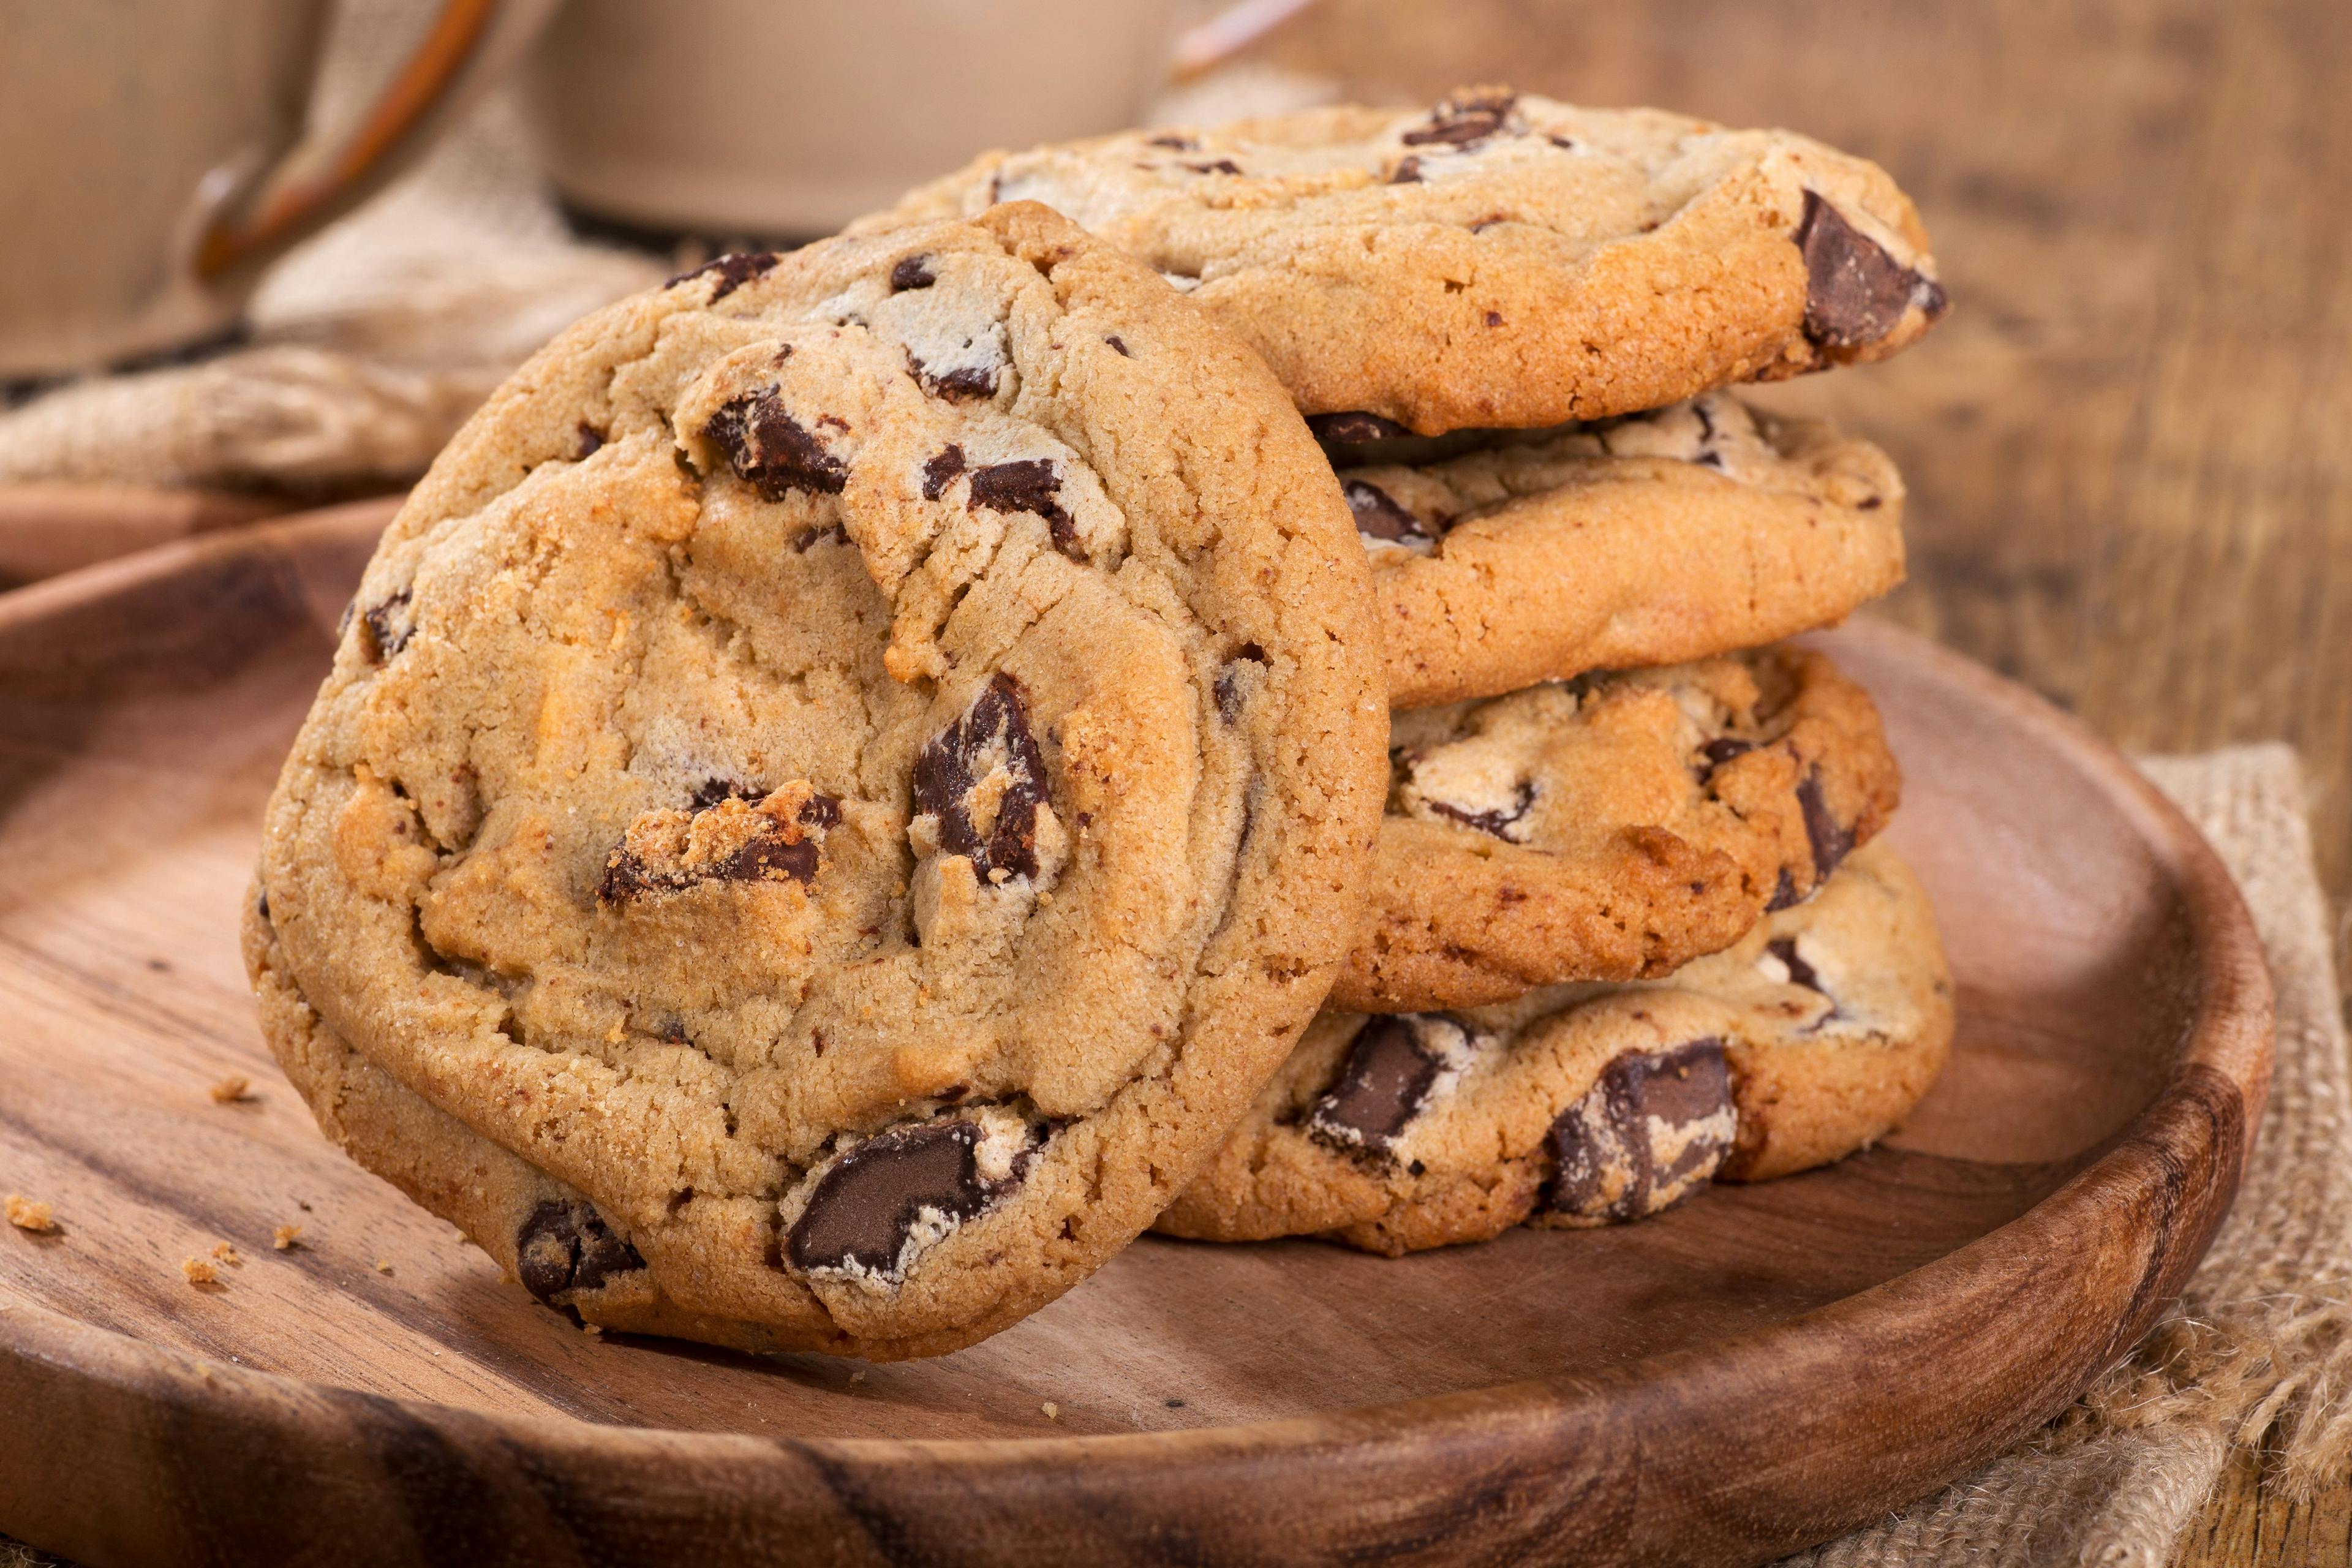 Closeup of chocolate chip cookies on a wooden plate | Image Credit: © chas53 - stock.adobe.com